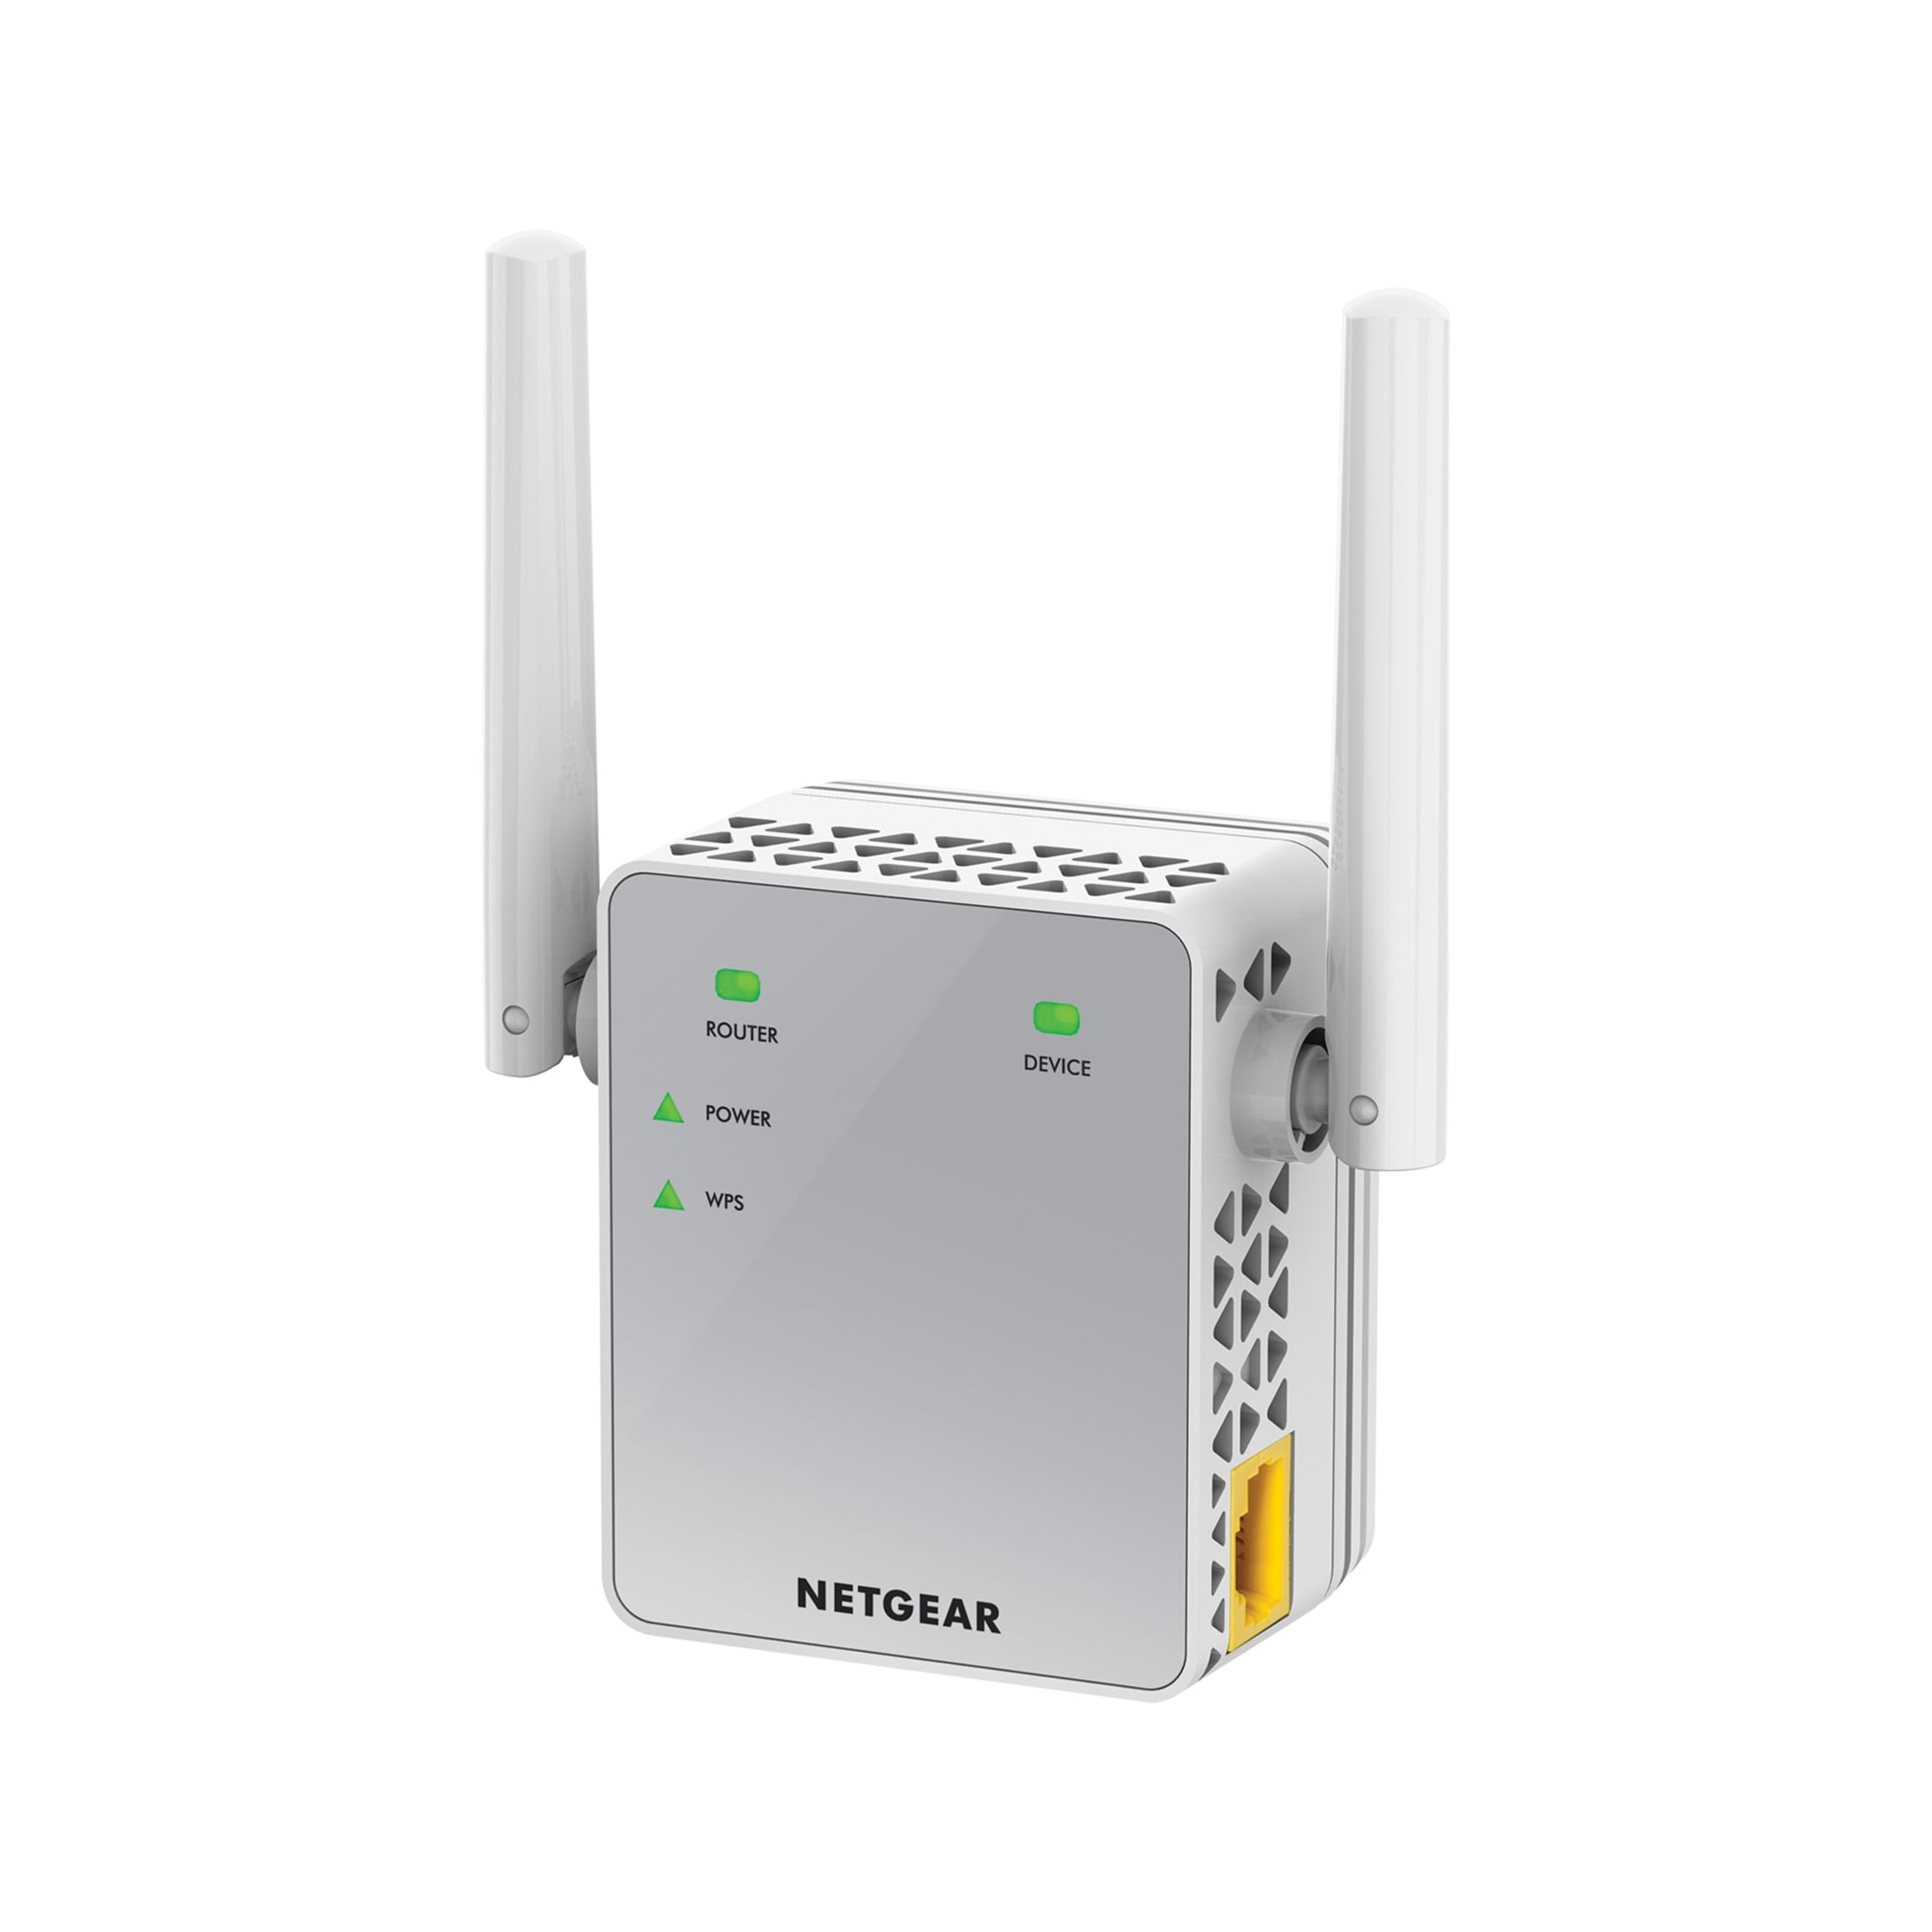 Netgear AC750 R6020-100NAS 300+450 Mbps Dual Band WiFi Router 